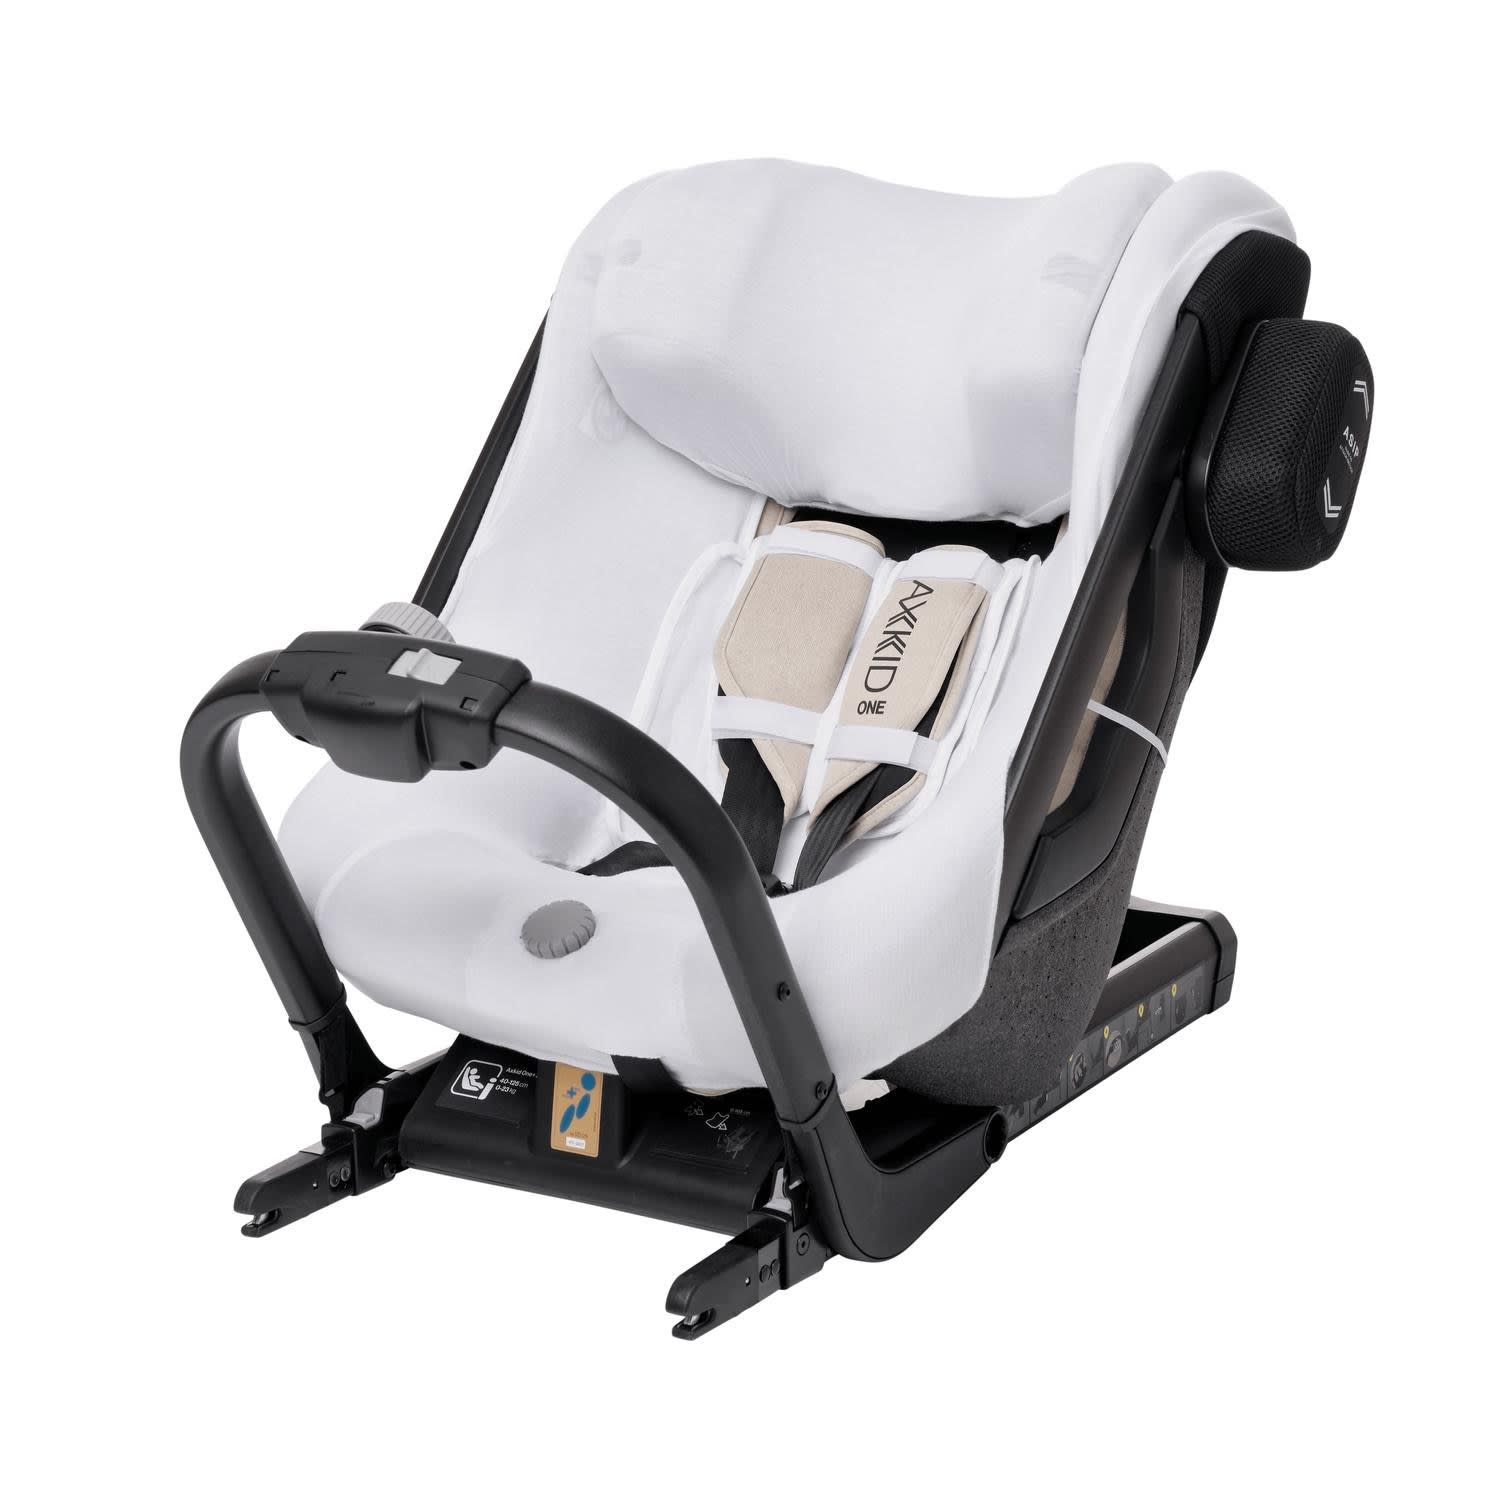 Axkid Car Seat Cover - One från Axkid